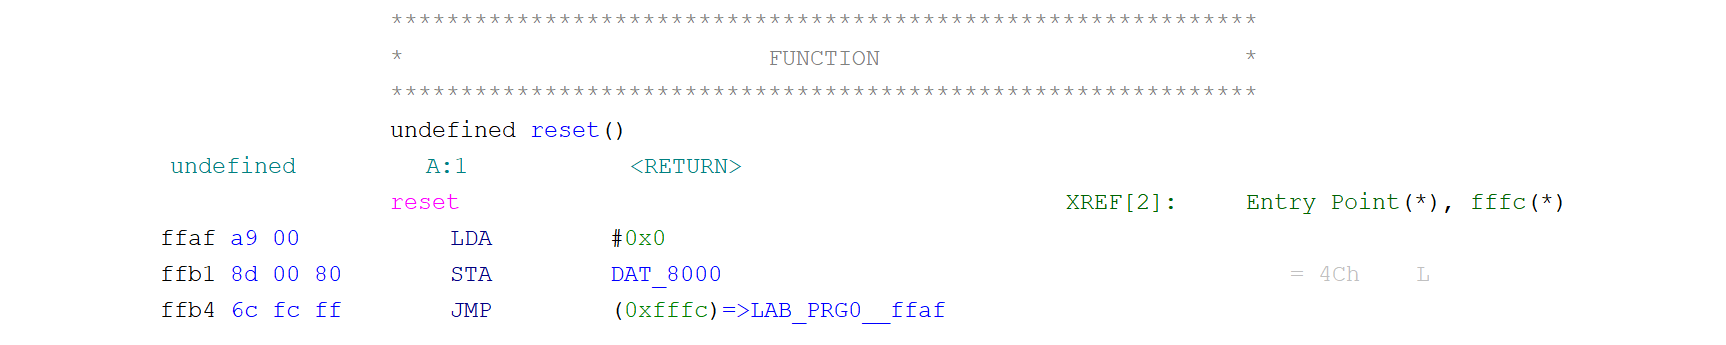 Ghidra disassembly showing the same "reset" function, but the "JMP" instruction now goes to "(0xfffc)=>LAB_PRG0__ffaf"